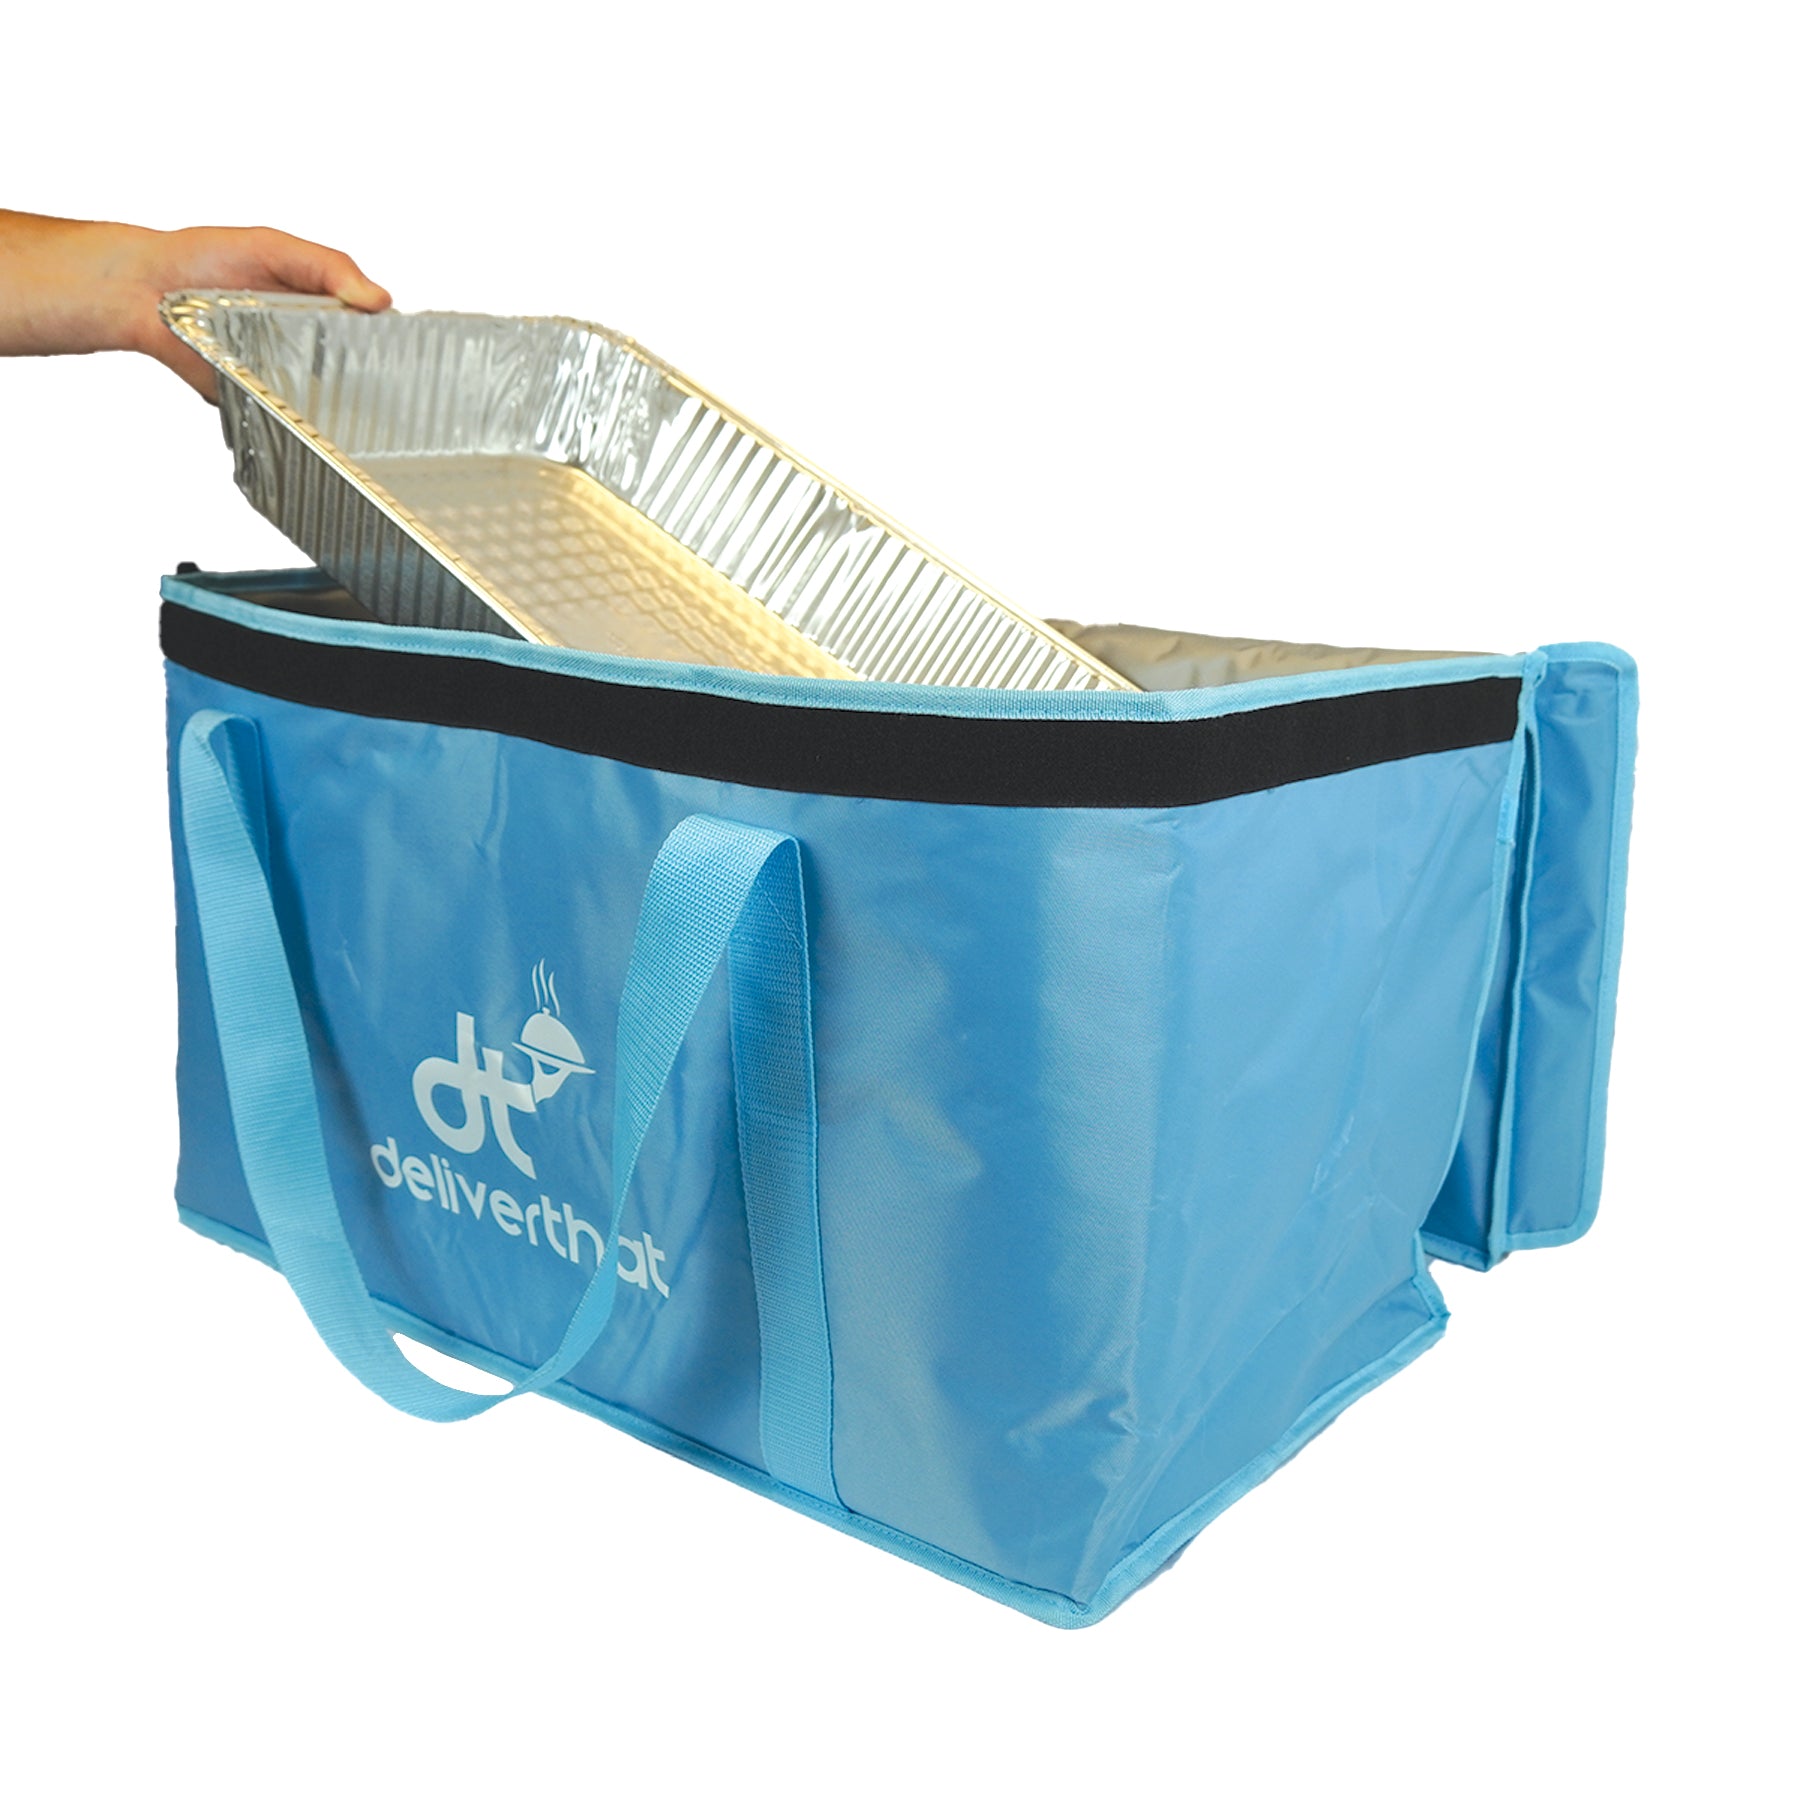 12 INCH FOOD DELIVERY BAG TOP OPENING - 12 INCH FOOD DELIVERY BAG TOP  OPENING Exporter, Manufacturer, Supplier, Trading Company, Wholesaler,  Retailer, Dealer, Fabricator & Producer, Belgaum, India